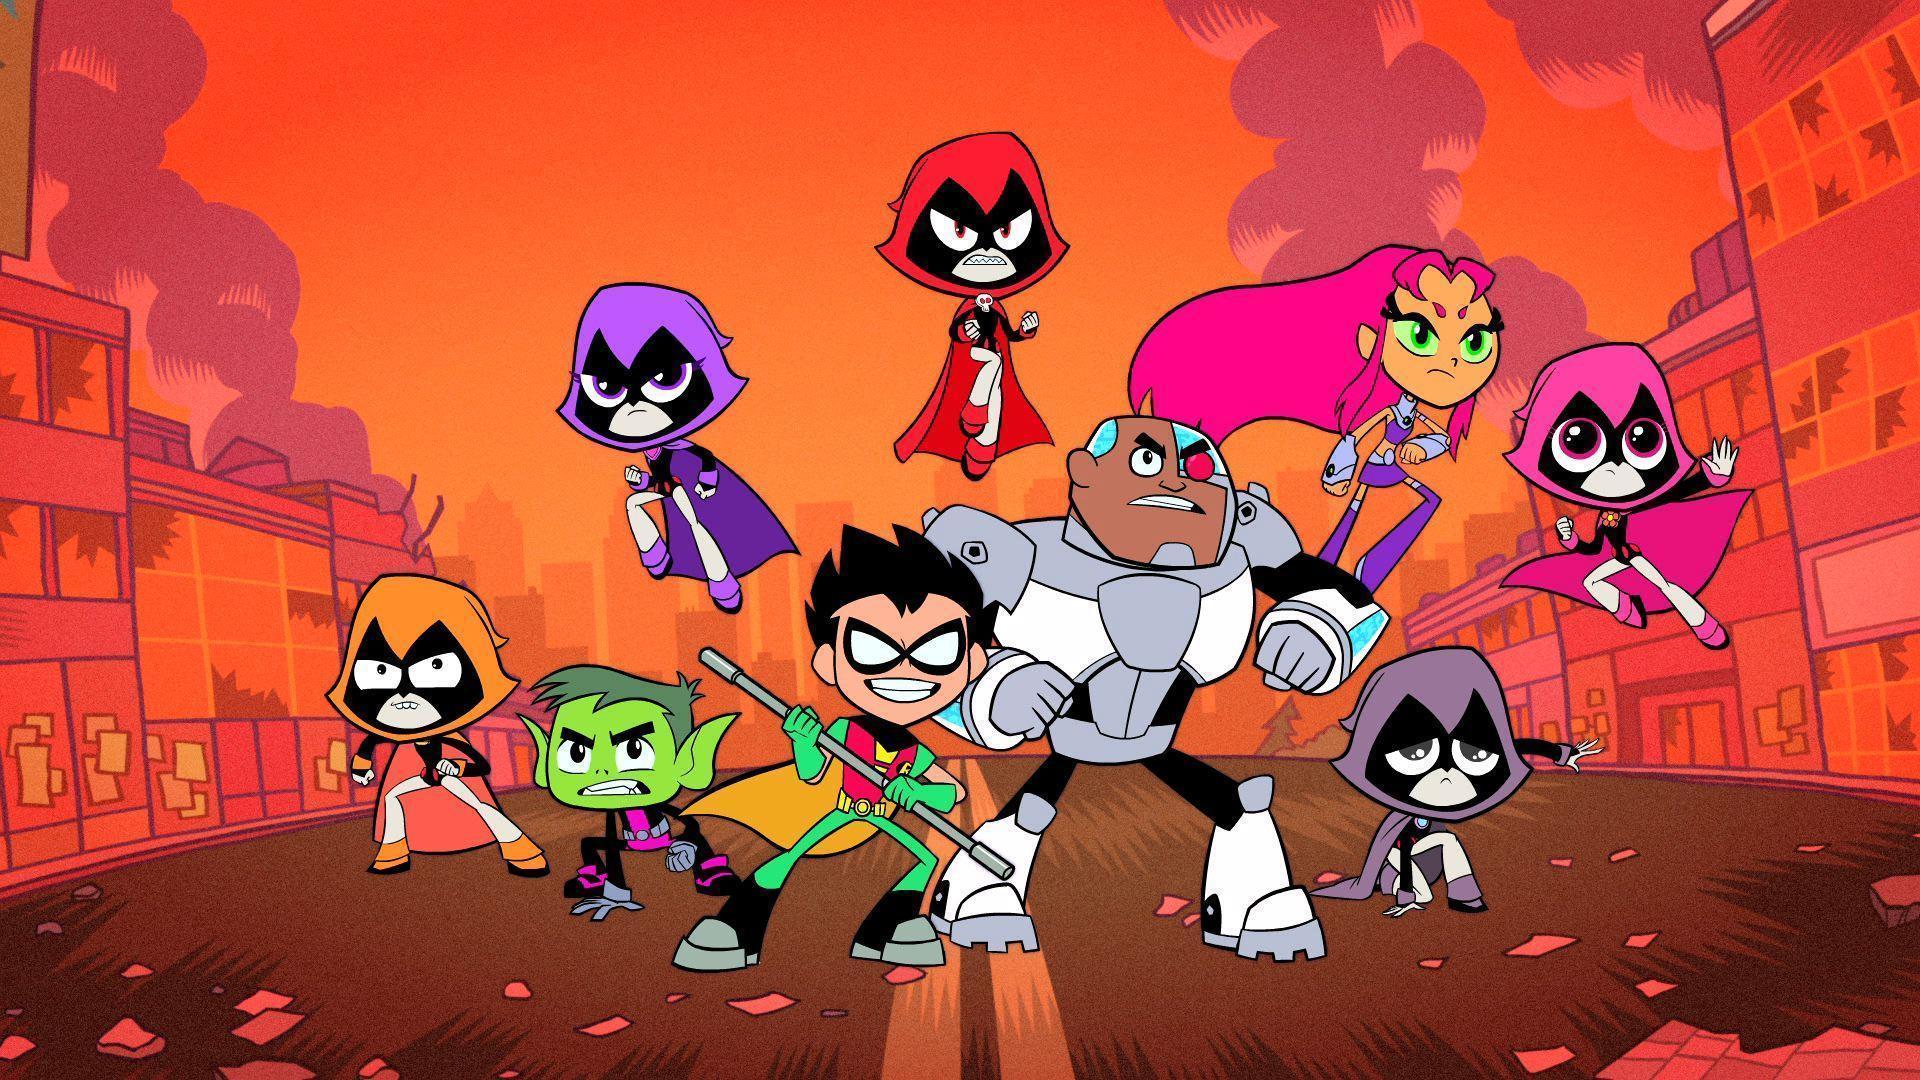 The Complete 1st Season Of “Teen Titans Go!” Now Available on Blu